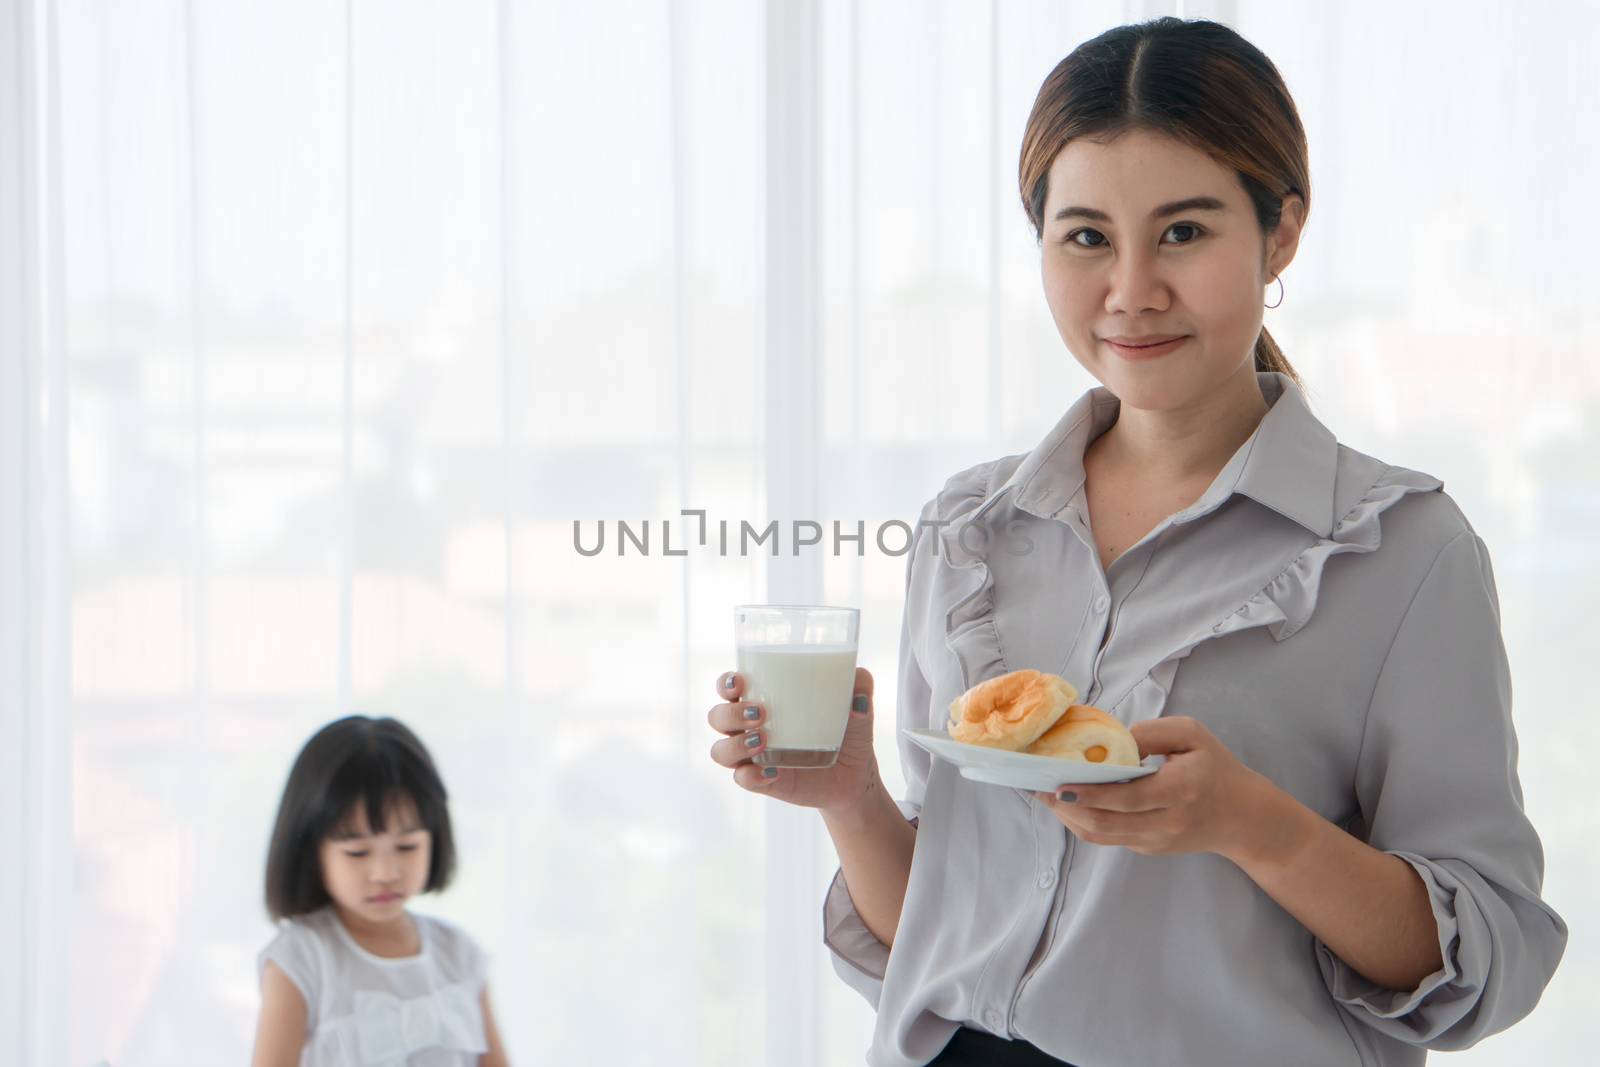 Asian mum is happily living with her little daughter. She holds a glass of milk and a bread plate for her daughter.